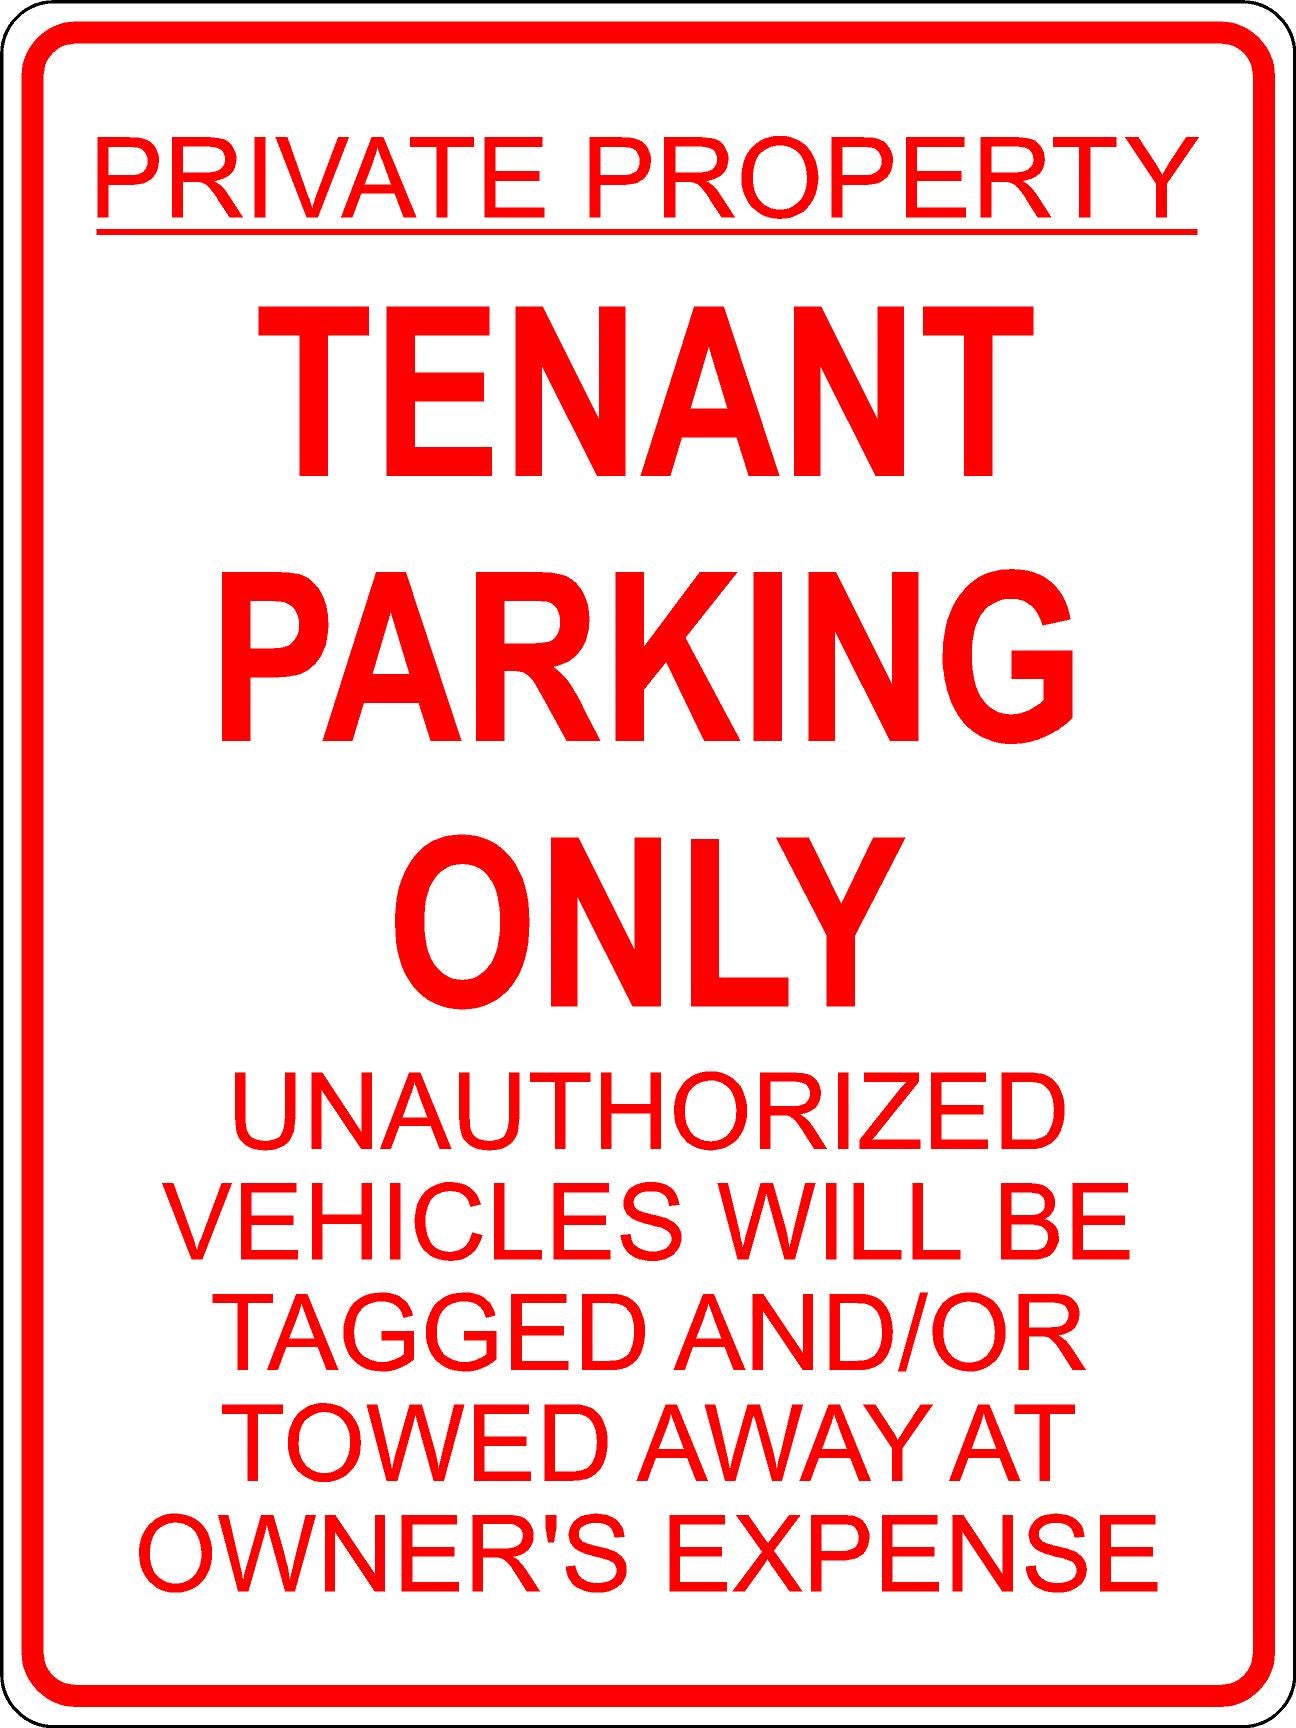 Tenant Parking Only Sign